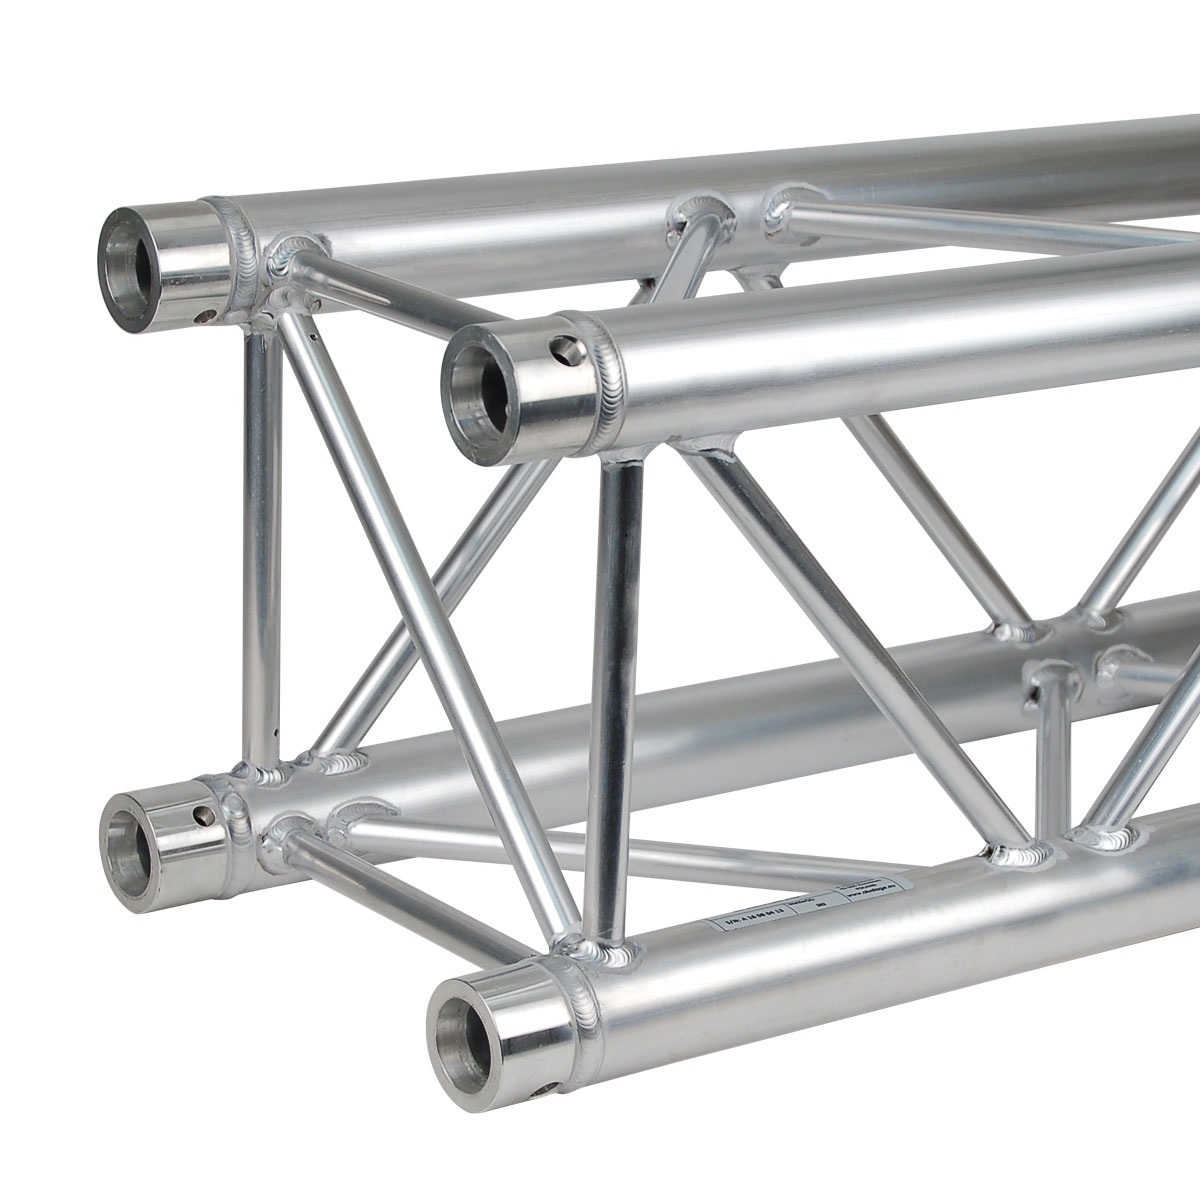 Square aluminium truss - Heavy duty - 290mm - Length 75cm - <strong>Connection kit included</strong>